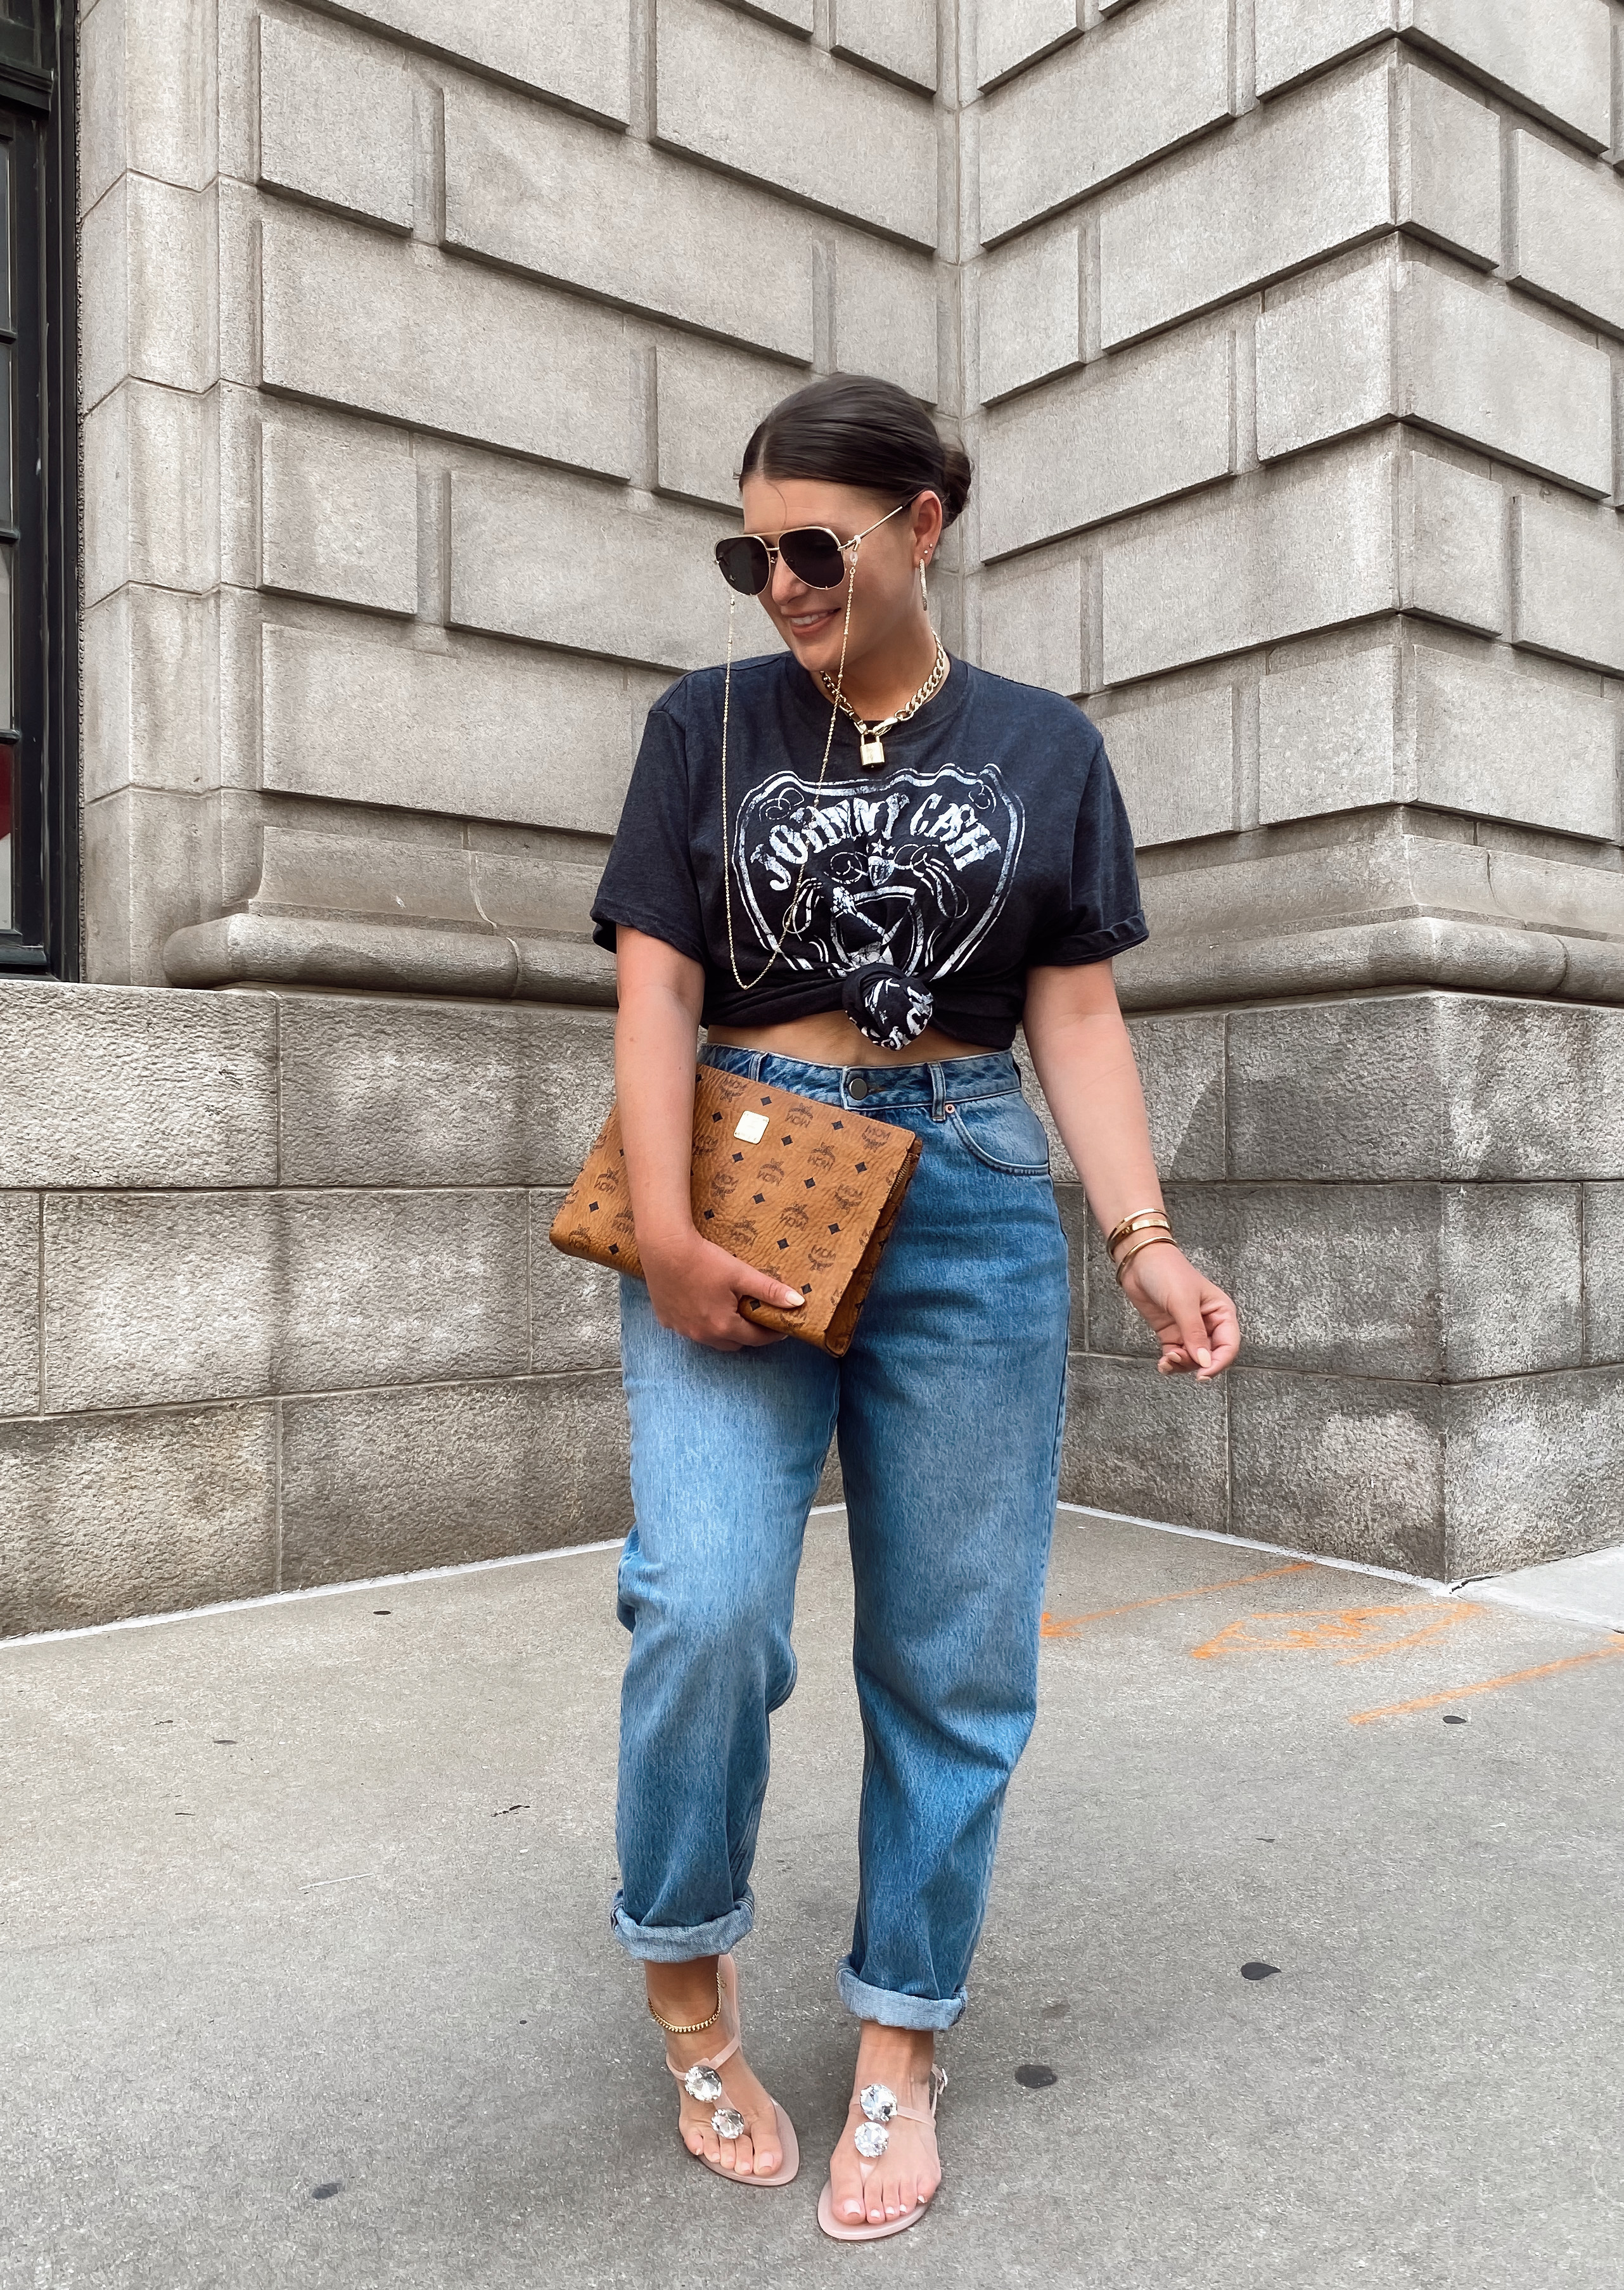 5 WAYS TO WEAR A GRAPHIC TEE FOR SUMMER: http://www.juliamarieb.com/2020/05/31/5-ways-to-style-graphic-tee-for-summer-|-the-rule-of-5/  |  @julia.marie.b